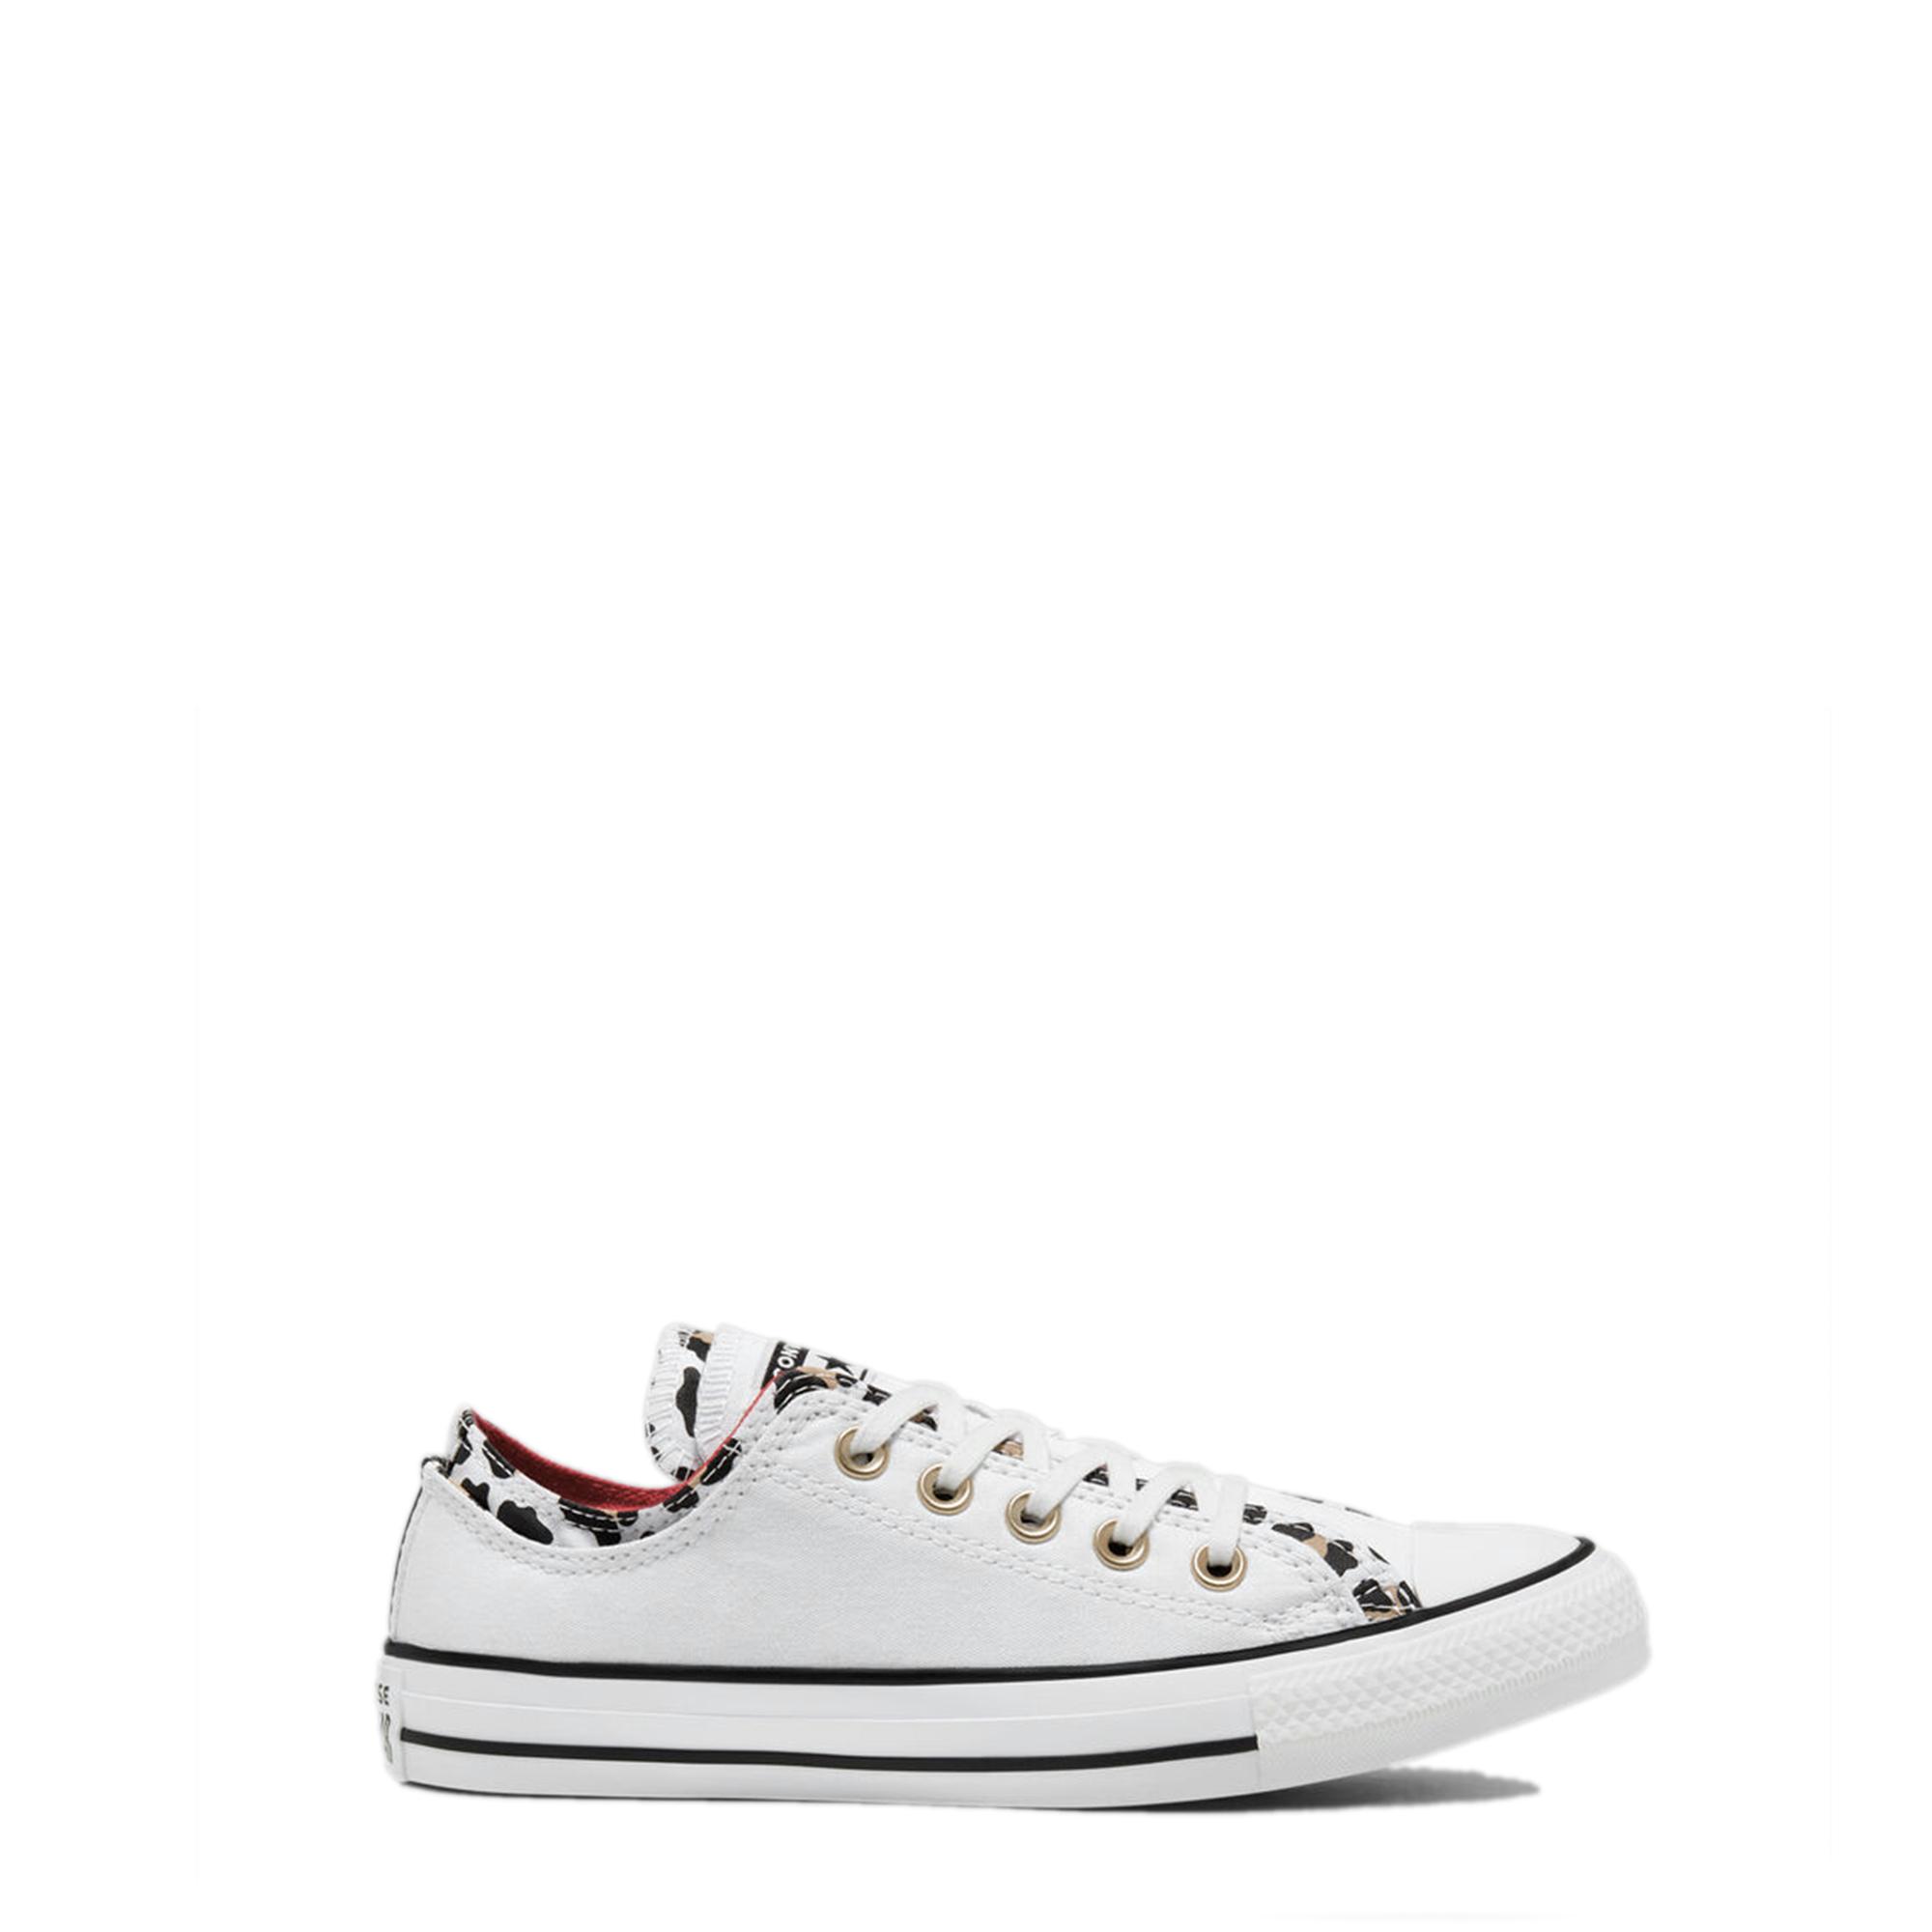 converse all star double upper